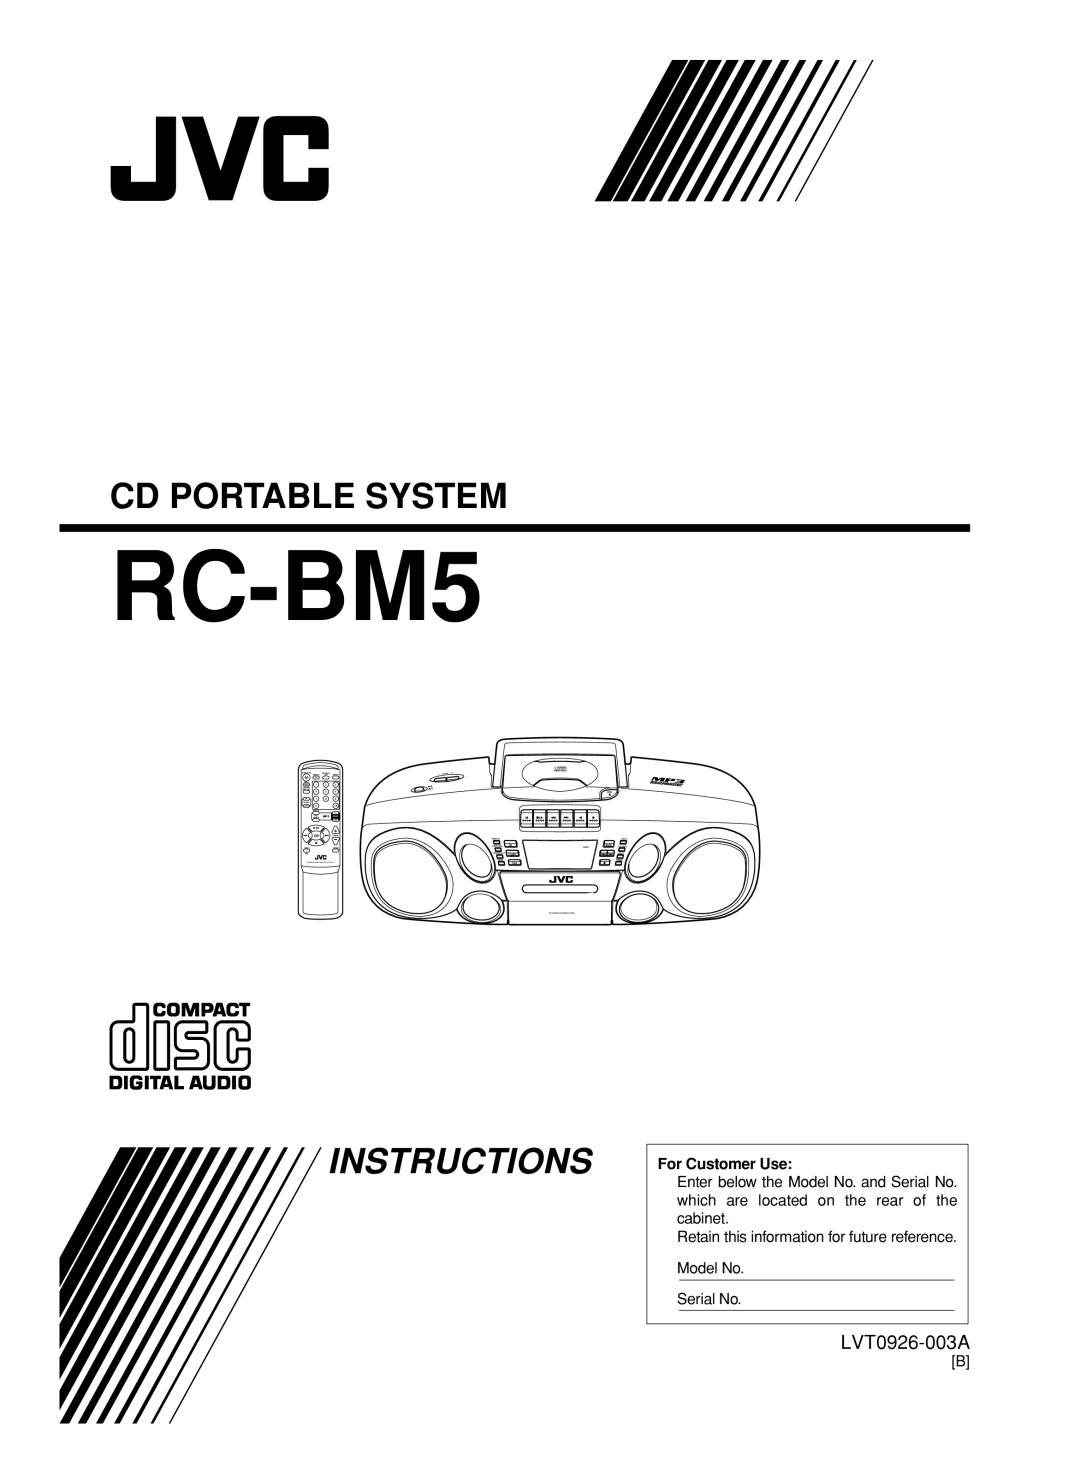 JVC RC-BM5 manual Cd Portable System, Instructions, LVT0926-003A, For Customer Use, Tuner, Tape 